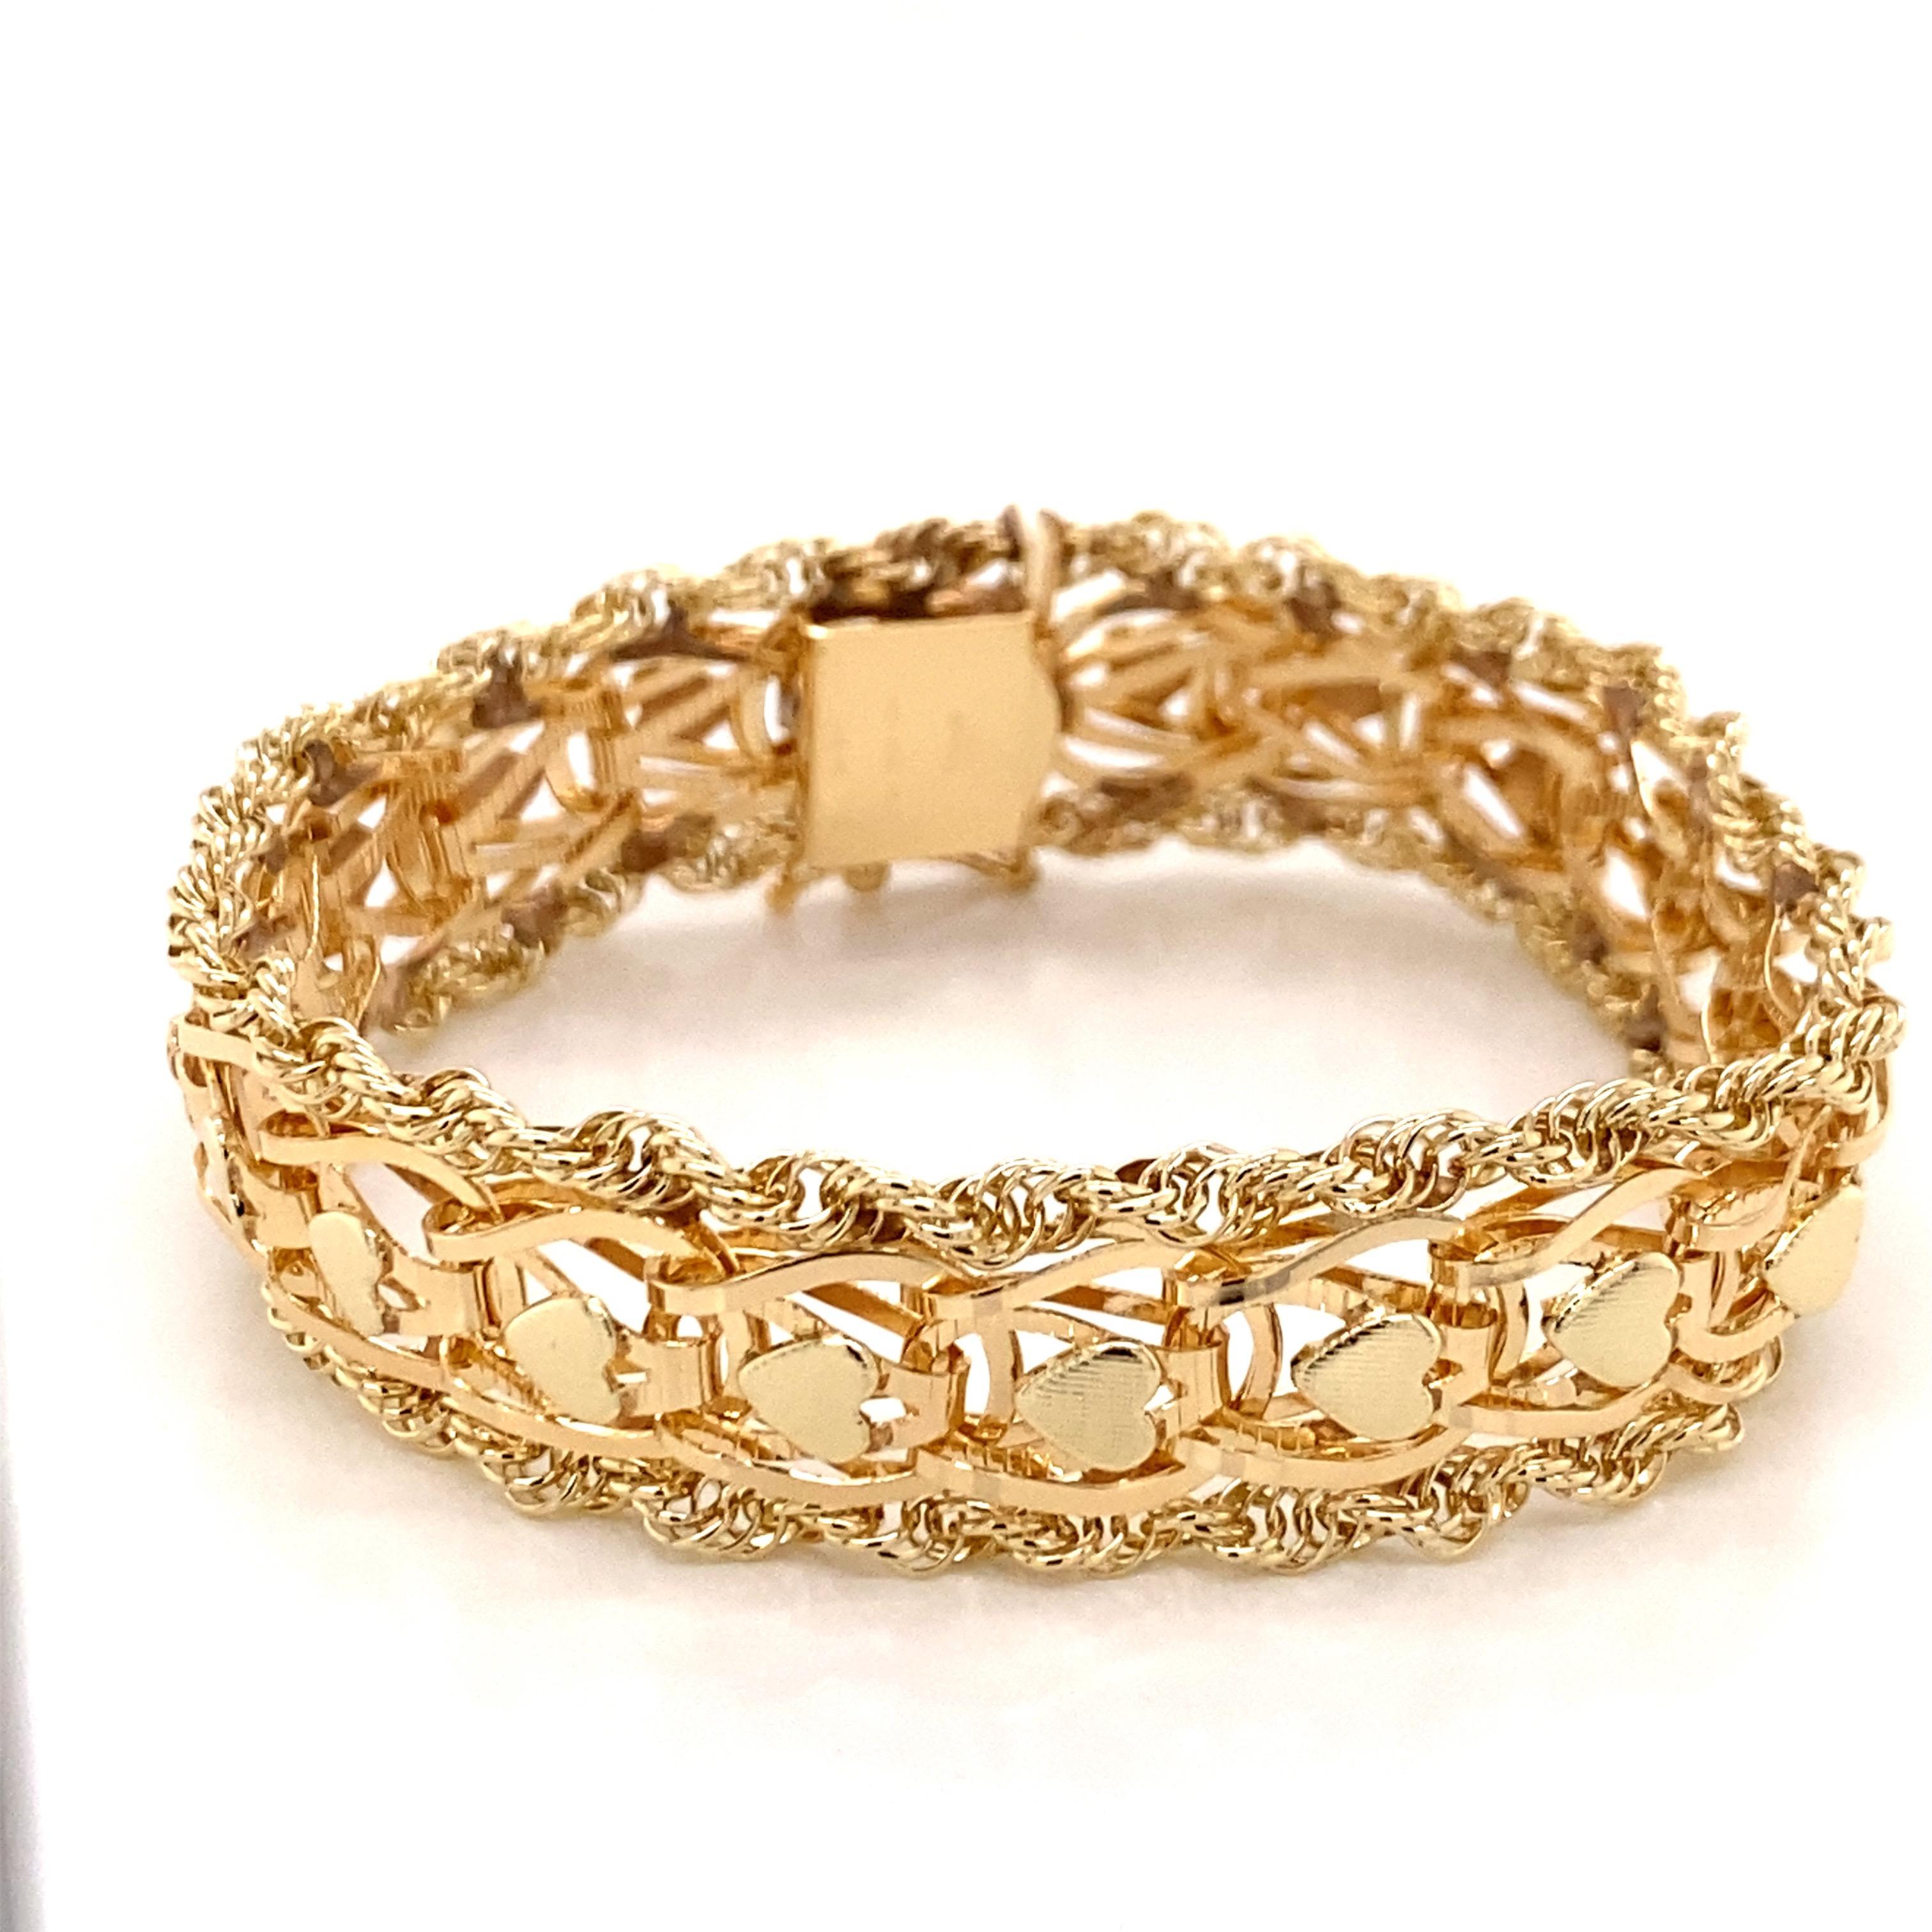 Vintage 1960s 14 Karat Yellow Gold Heart Shape Link Bracelet with Rope Edge - The bracelet measure 7.25 inches long and 1/2 inch wide and features a hidden clasp with a figure 8 safety. The bracelet weighs 23.5 grams.